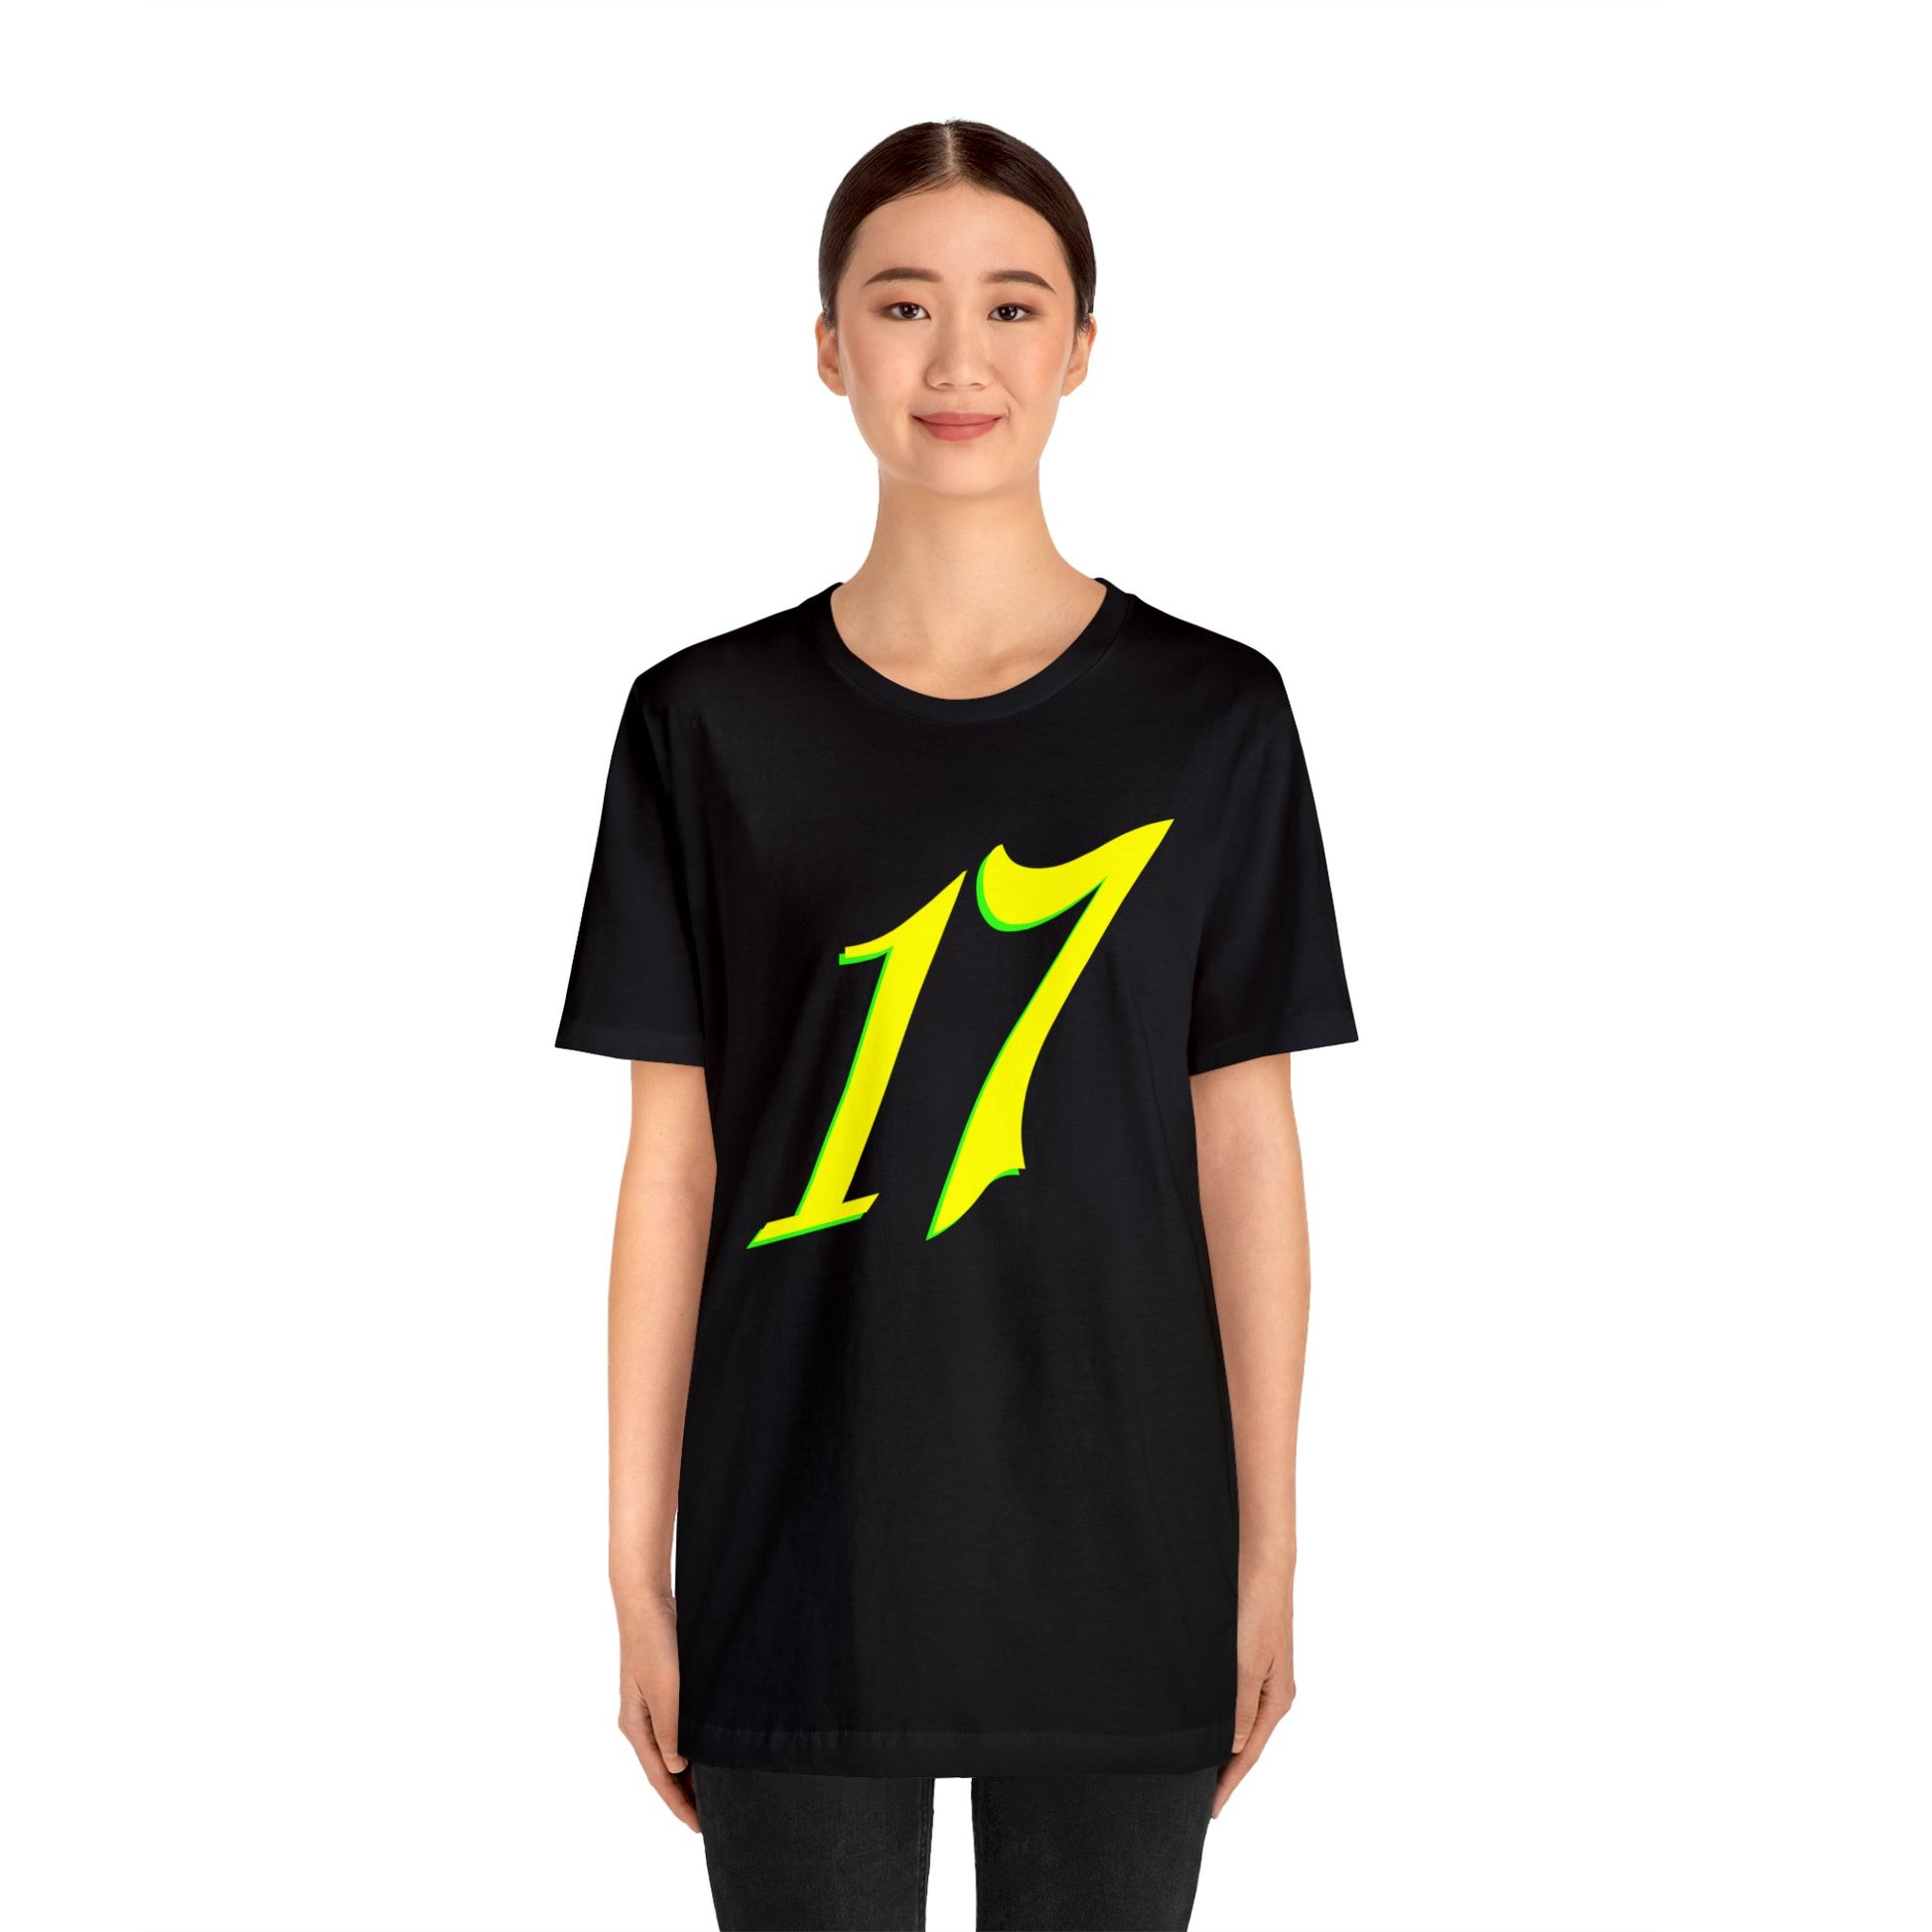 Number 17 Design - Soft Cotton Tee for birthdays and celebrations, Gift for friends and family, Multiple Options by clothezy.com in Black Size Medium - Buy Now